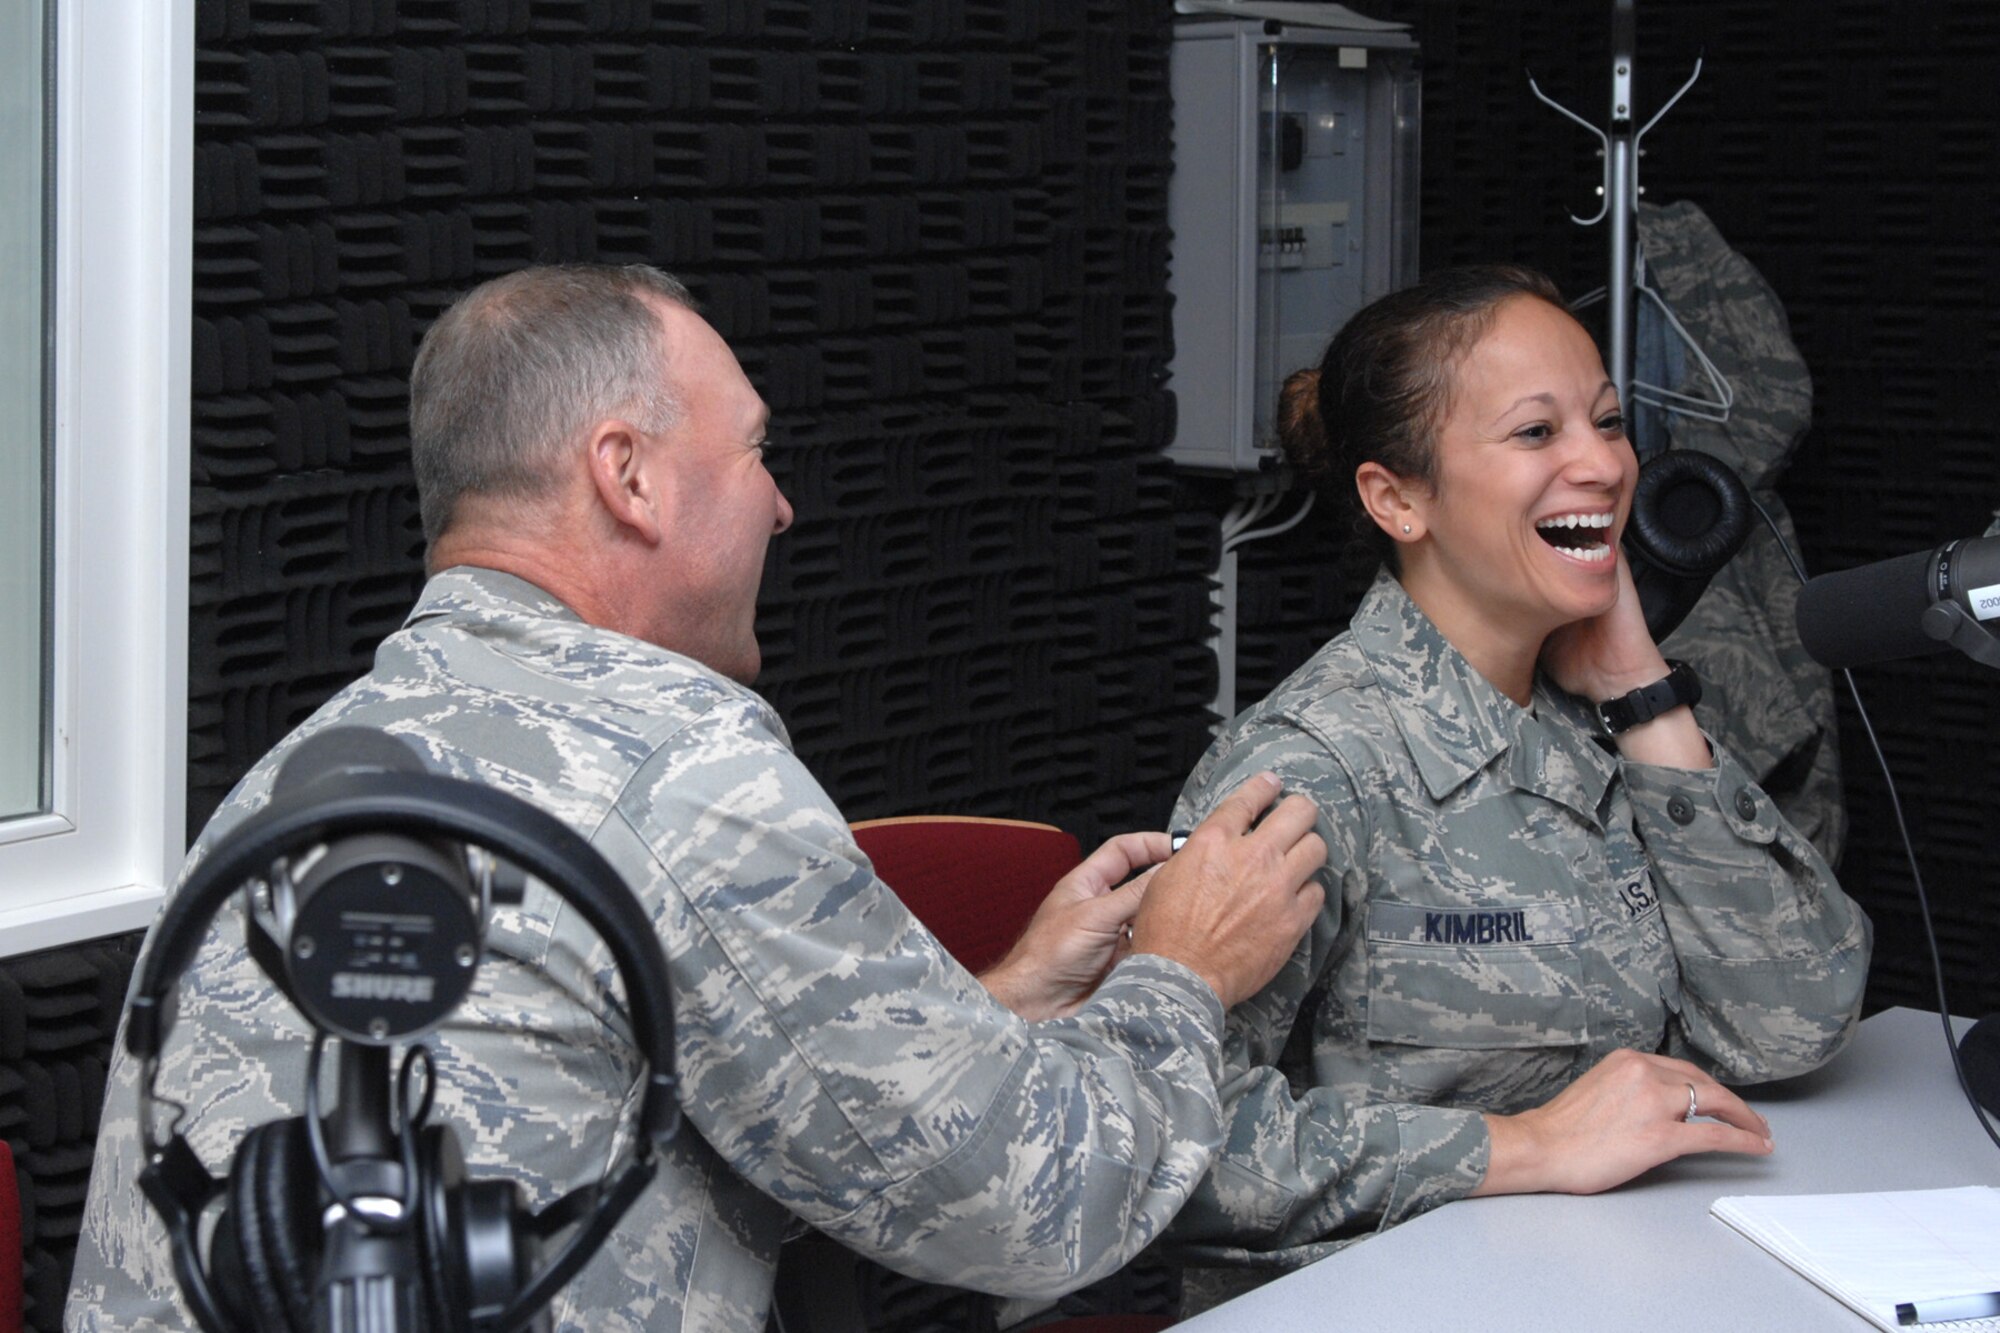 SPANGDAHLEM AIR BASE Germany – 52nd Fighter Wing Commander Tip Wight tacks technical sergeant stripes on to then Staff Sgt. Kimberly Kimbril, 52nd Fighter Wing Advanced Programs Office, during the commander’s radio show Sept. 4.  Sergeant Kimbril was surprise with an on-air Stripes for Excellent Performers promotion. (U.S. Air Force photo/Airman 1st Class Staci Miller)